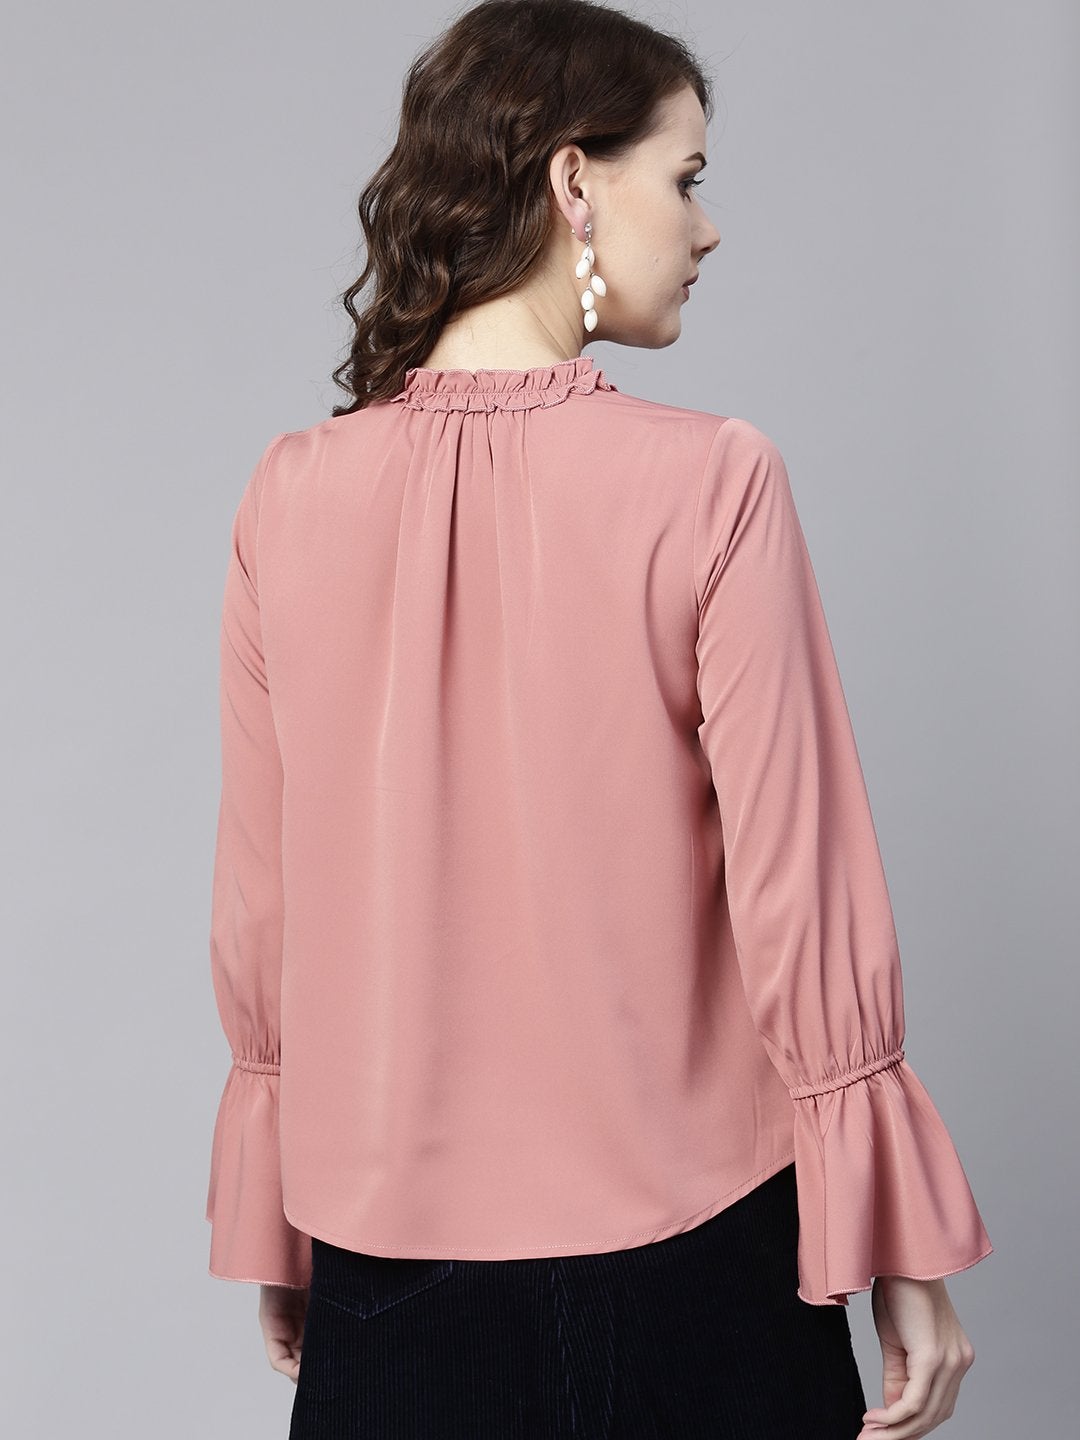 Women's Ruffled Pearl Embellished Collar Top - Pannkh